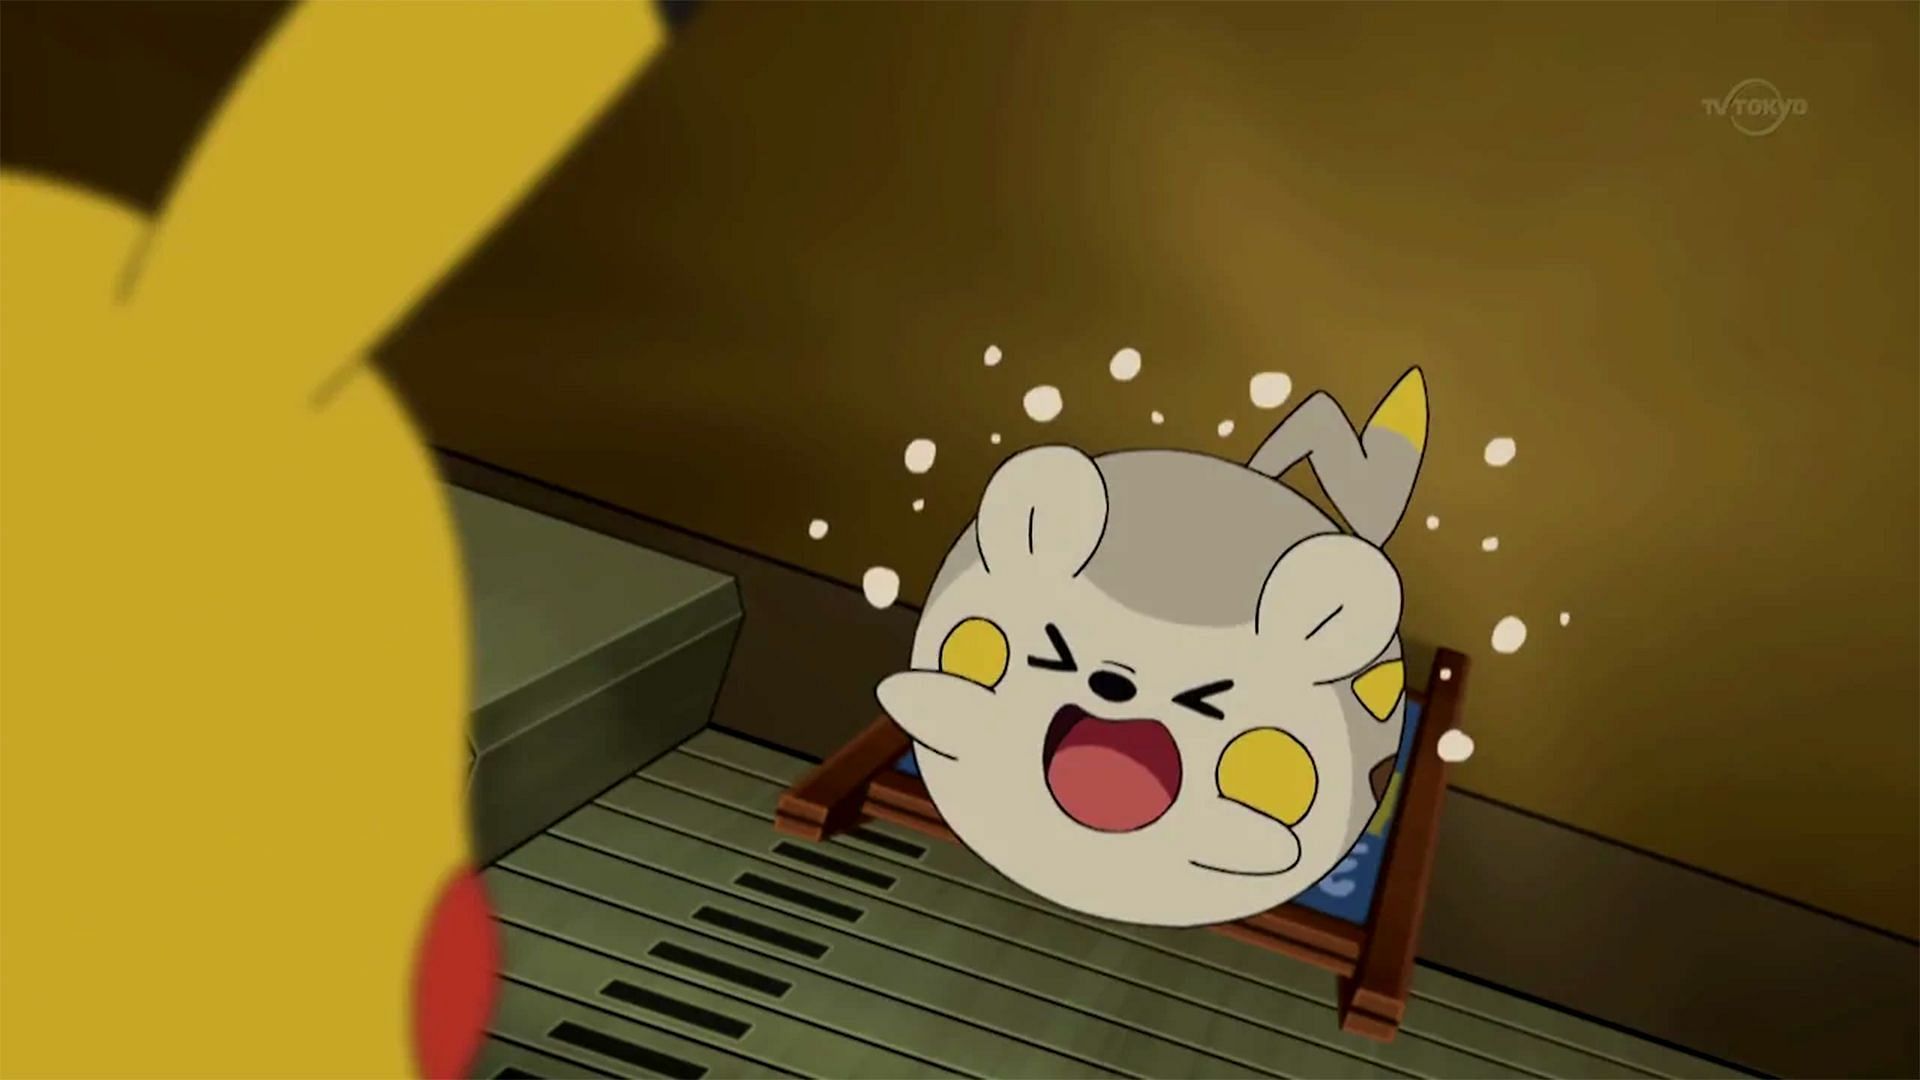 Togedemaru as it appears to be in the anime (Image via The Pokemon Company)